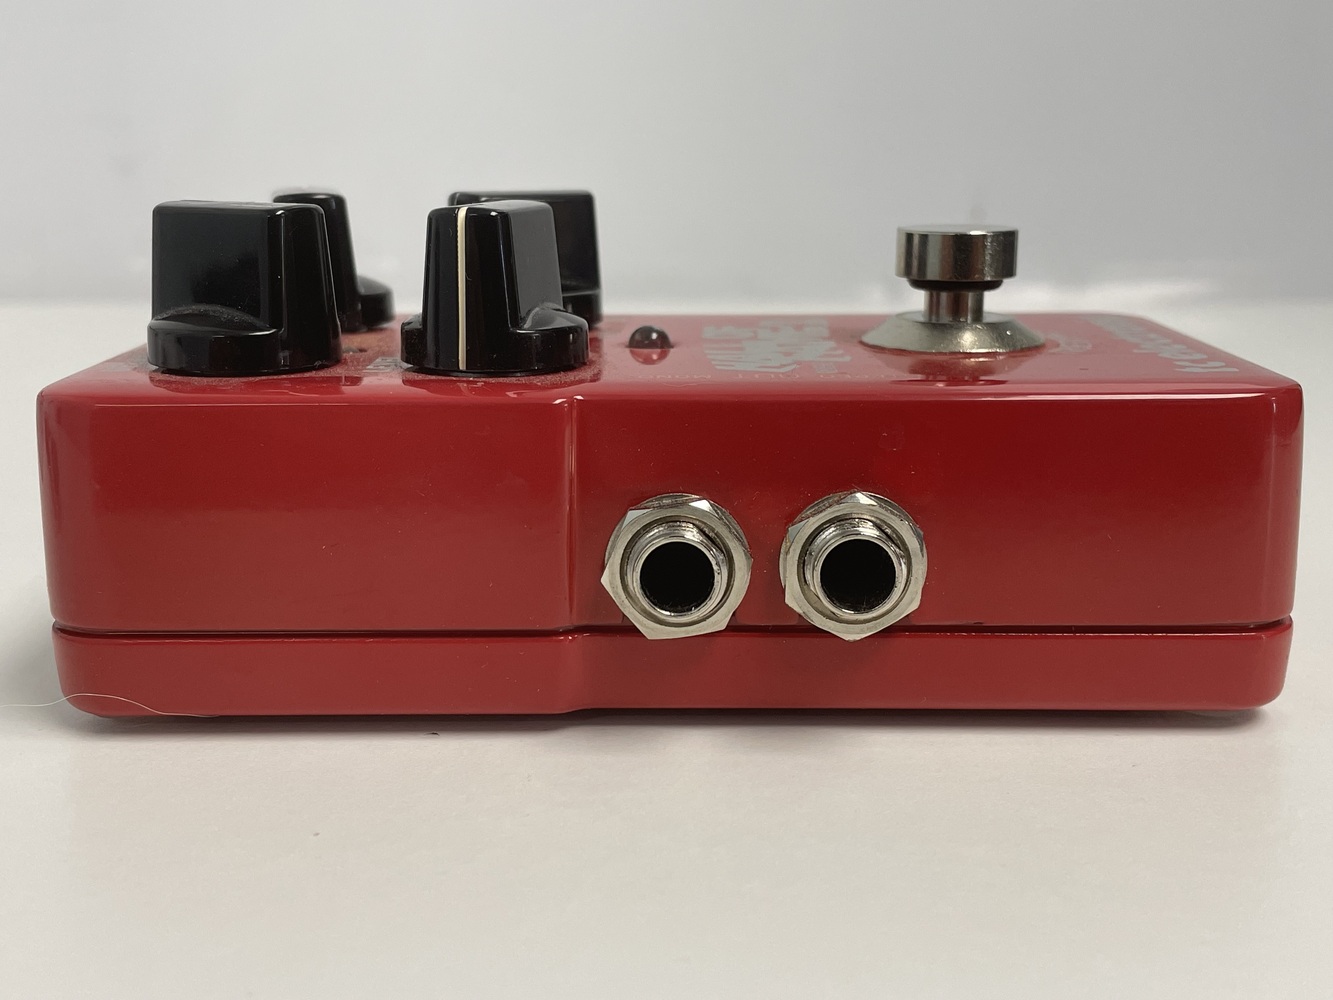 Hall of Fame 2 Reverb Pedal